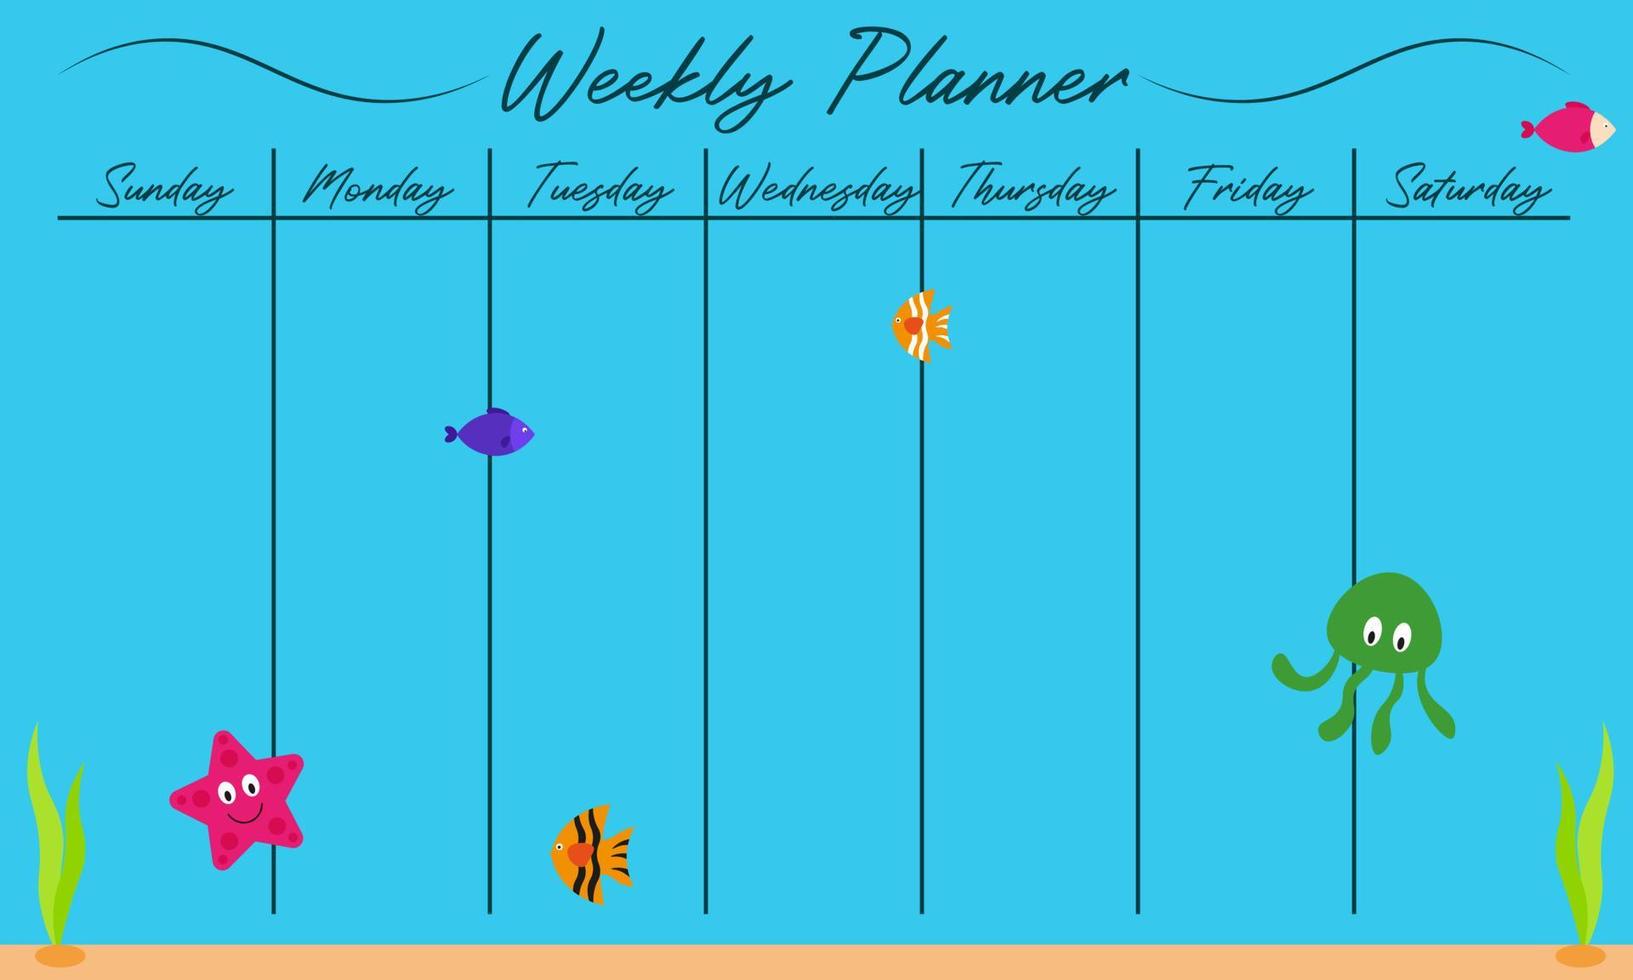 Cute weekly planner background.Vector illustration for kid and baby vector